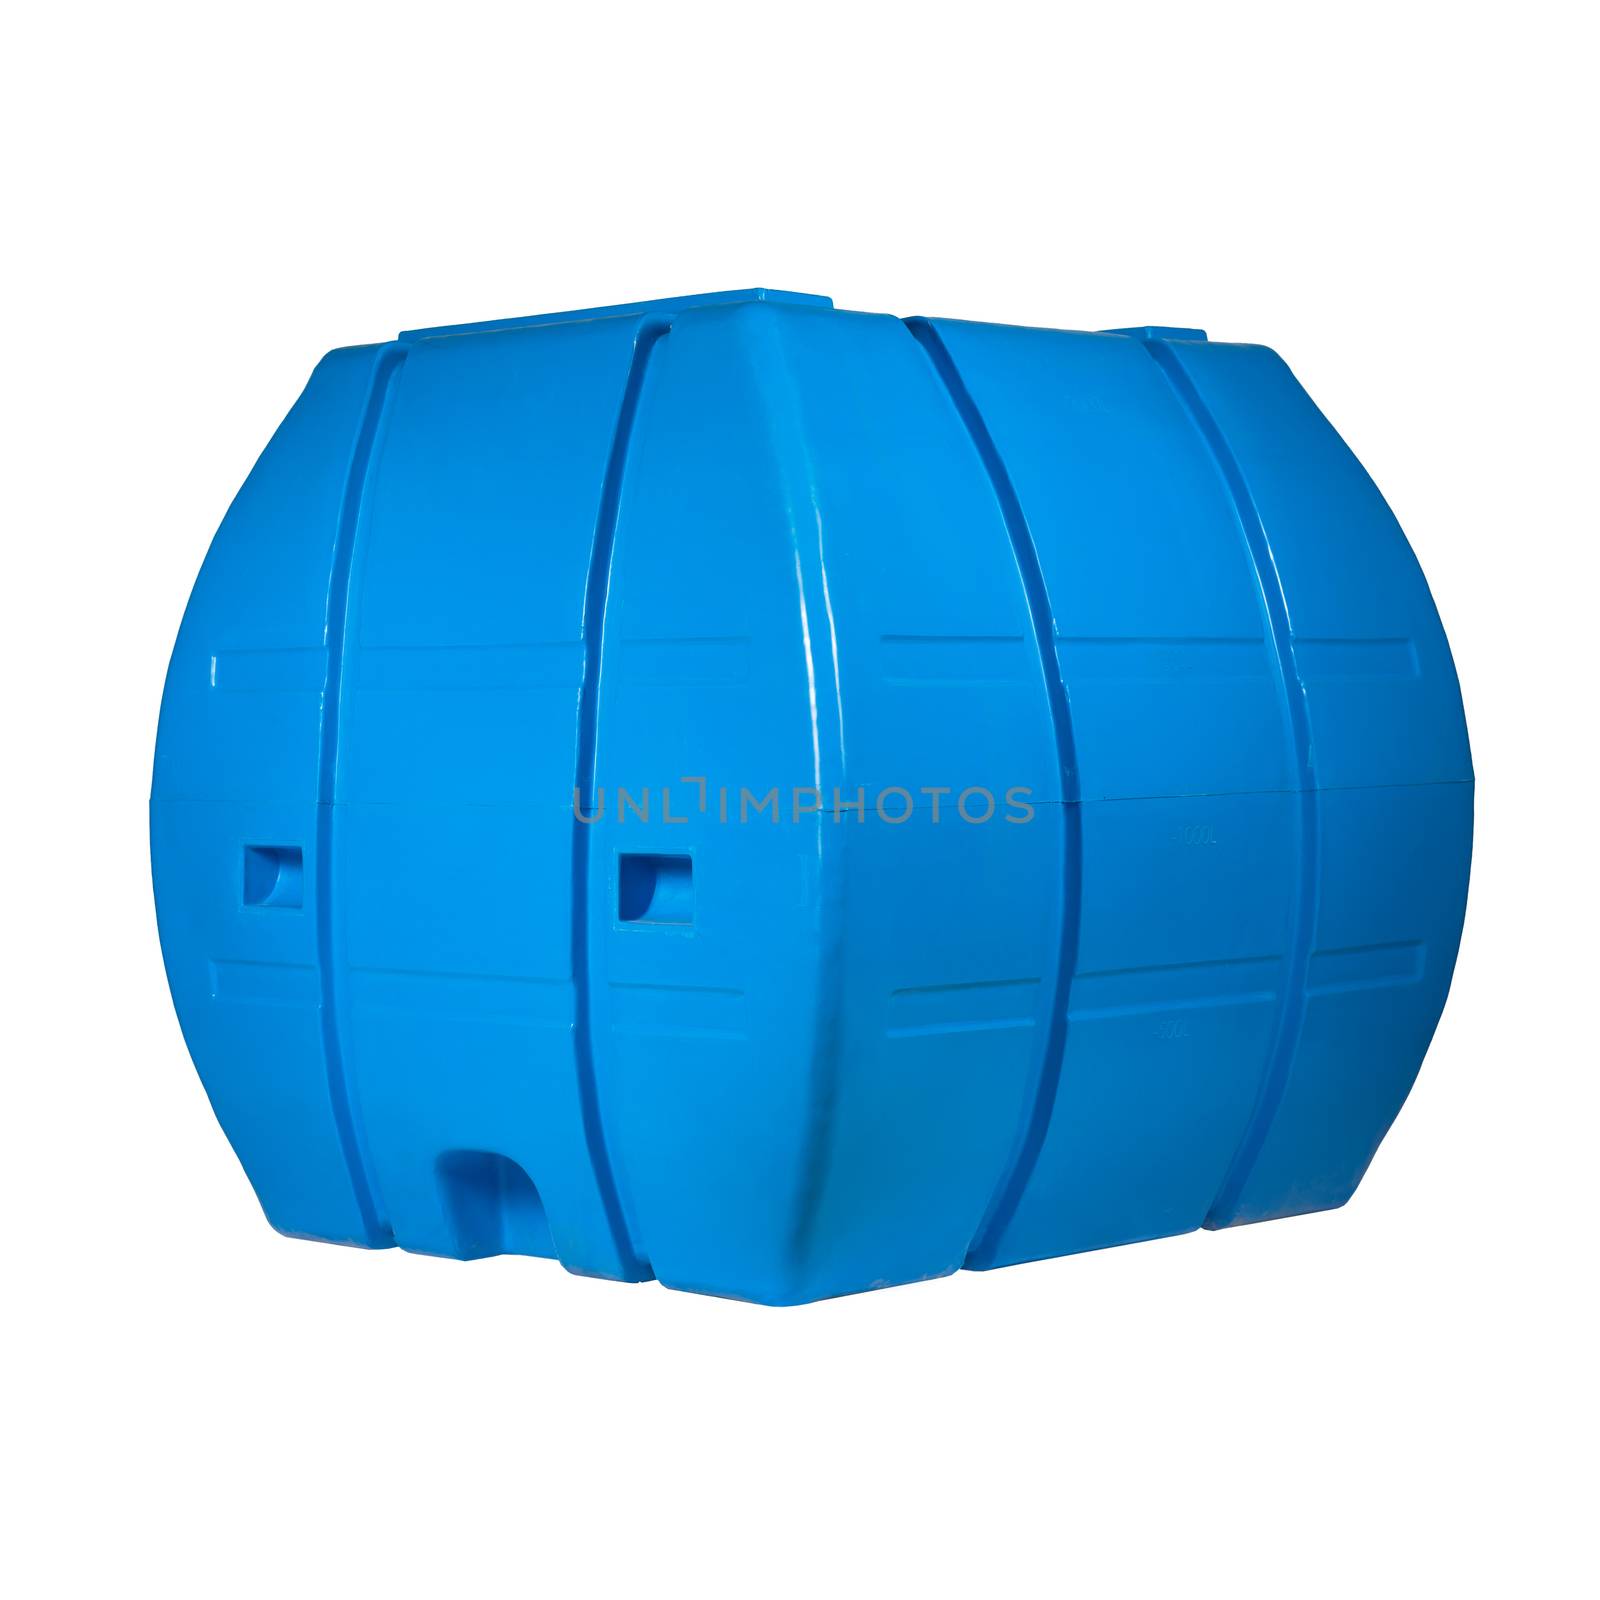 Big polyethylene container of 2000 l. for accumulation, storage and transportation of not only technical or drinking water, but also a variety of dry and liquid food products, as well as oils and chemicals.